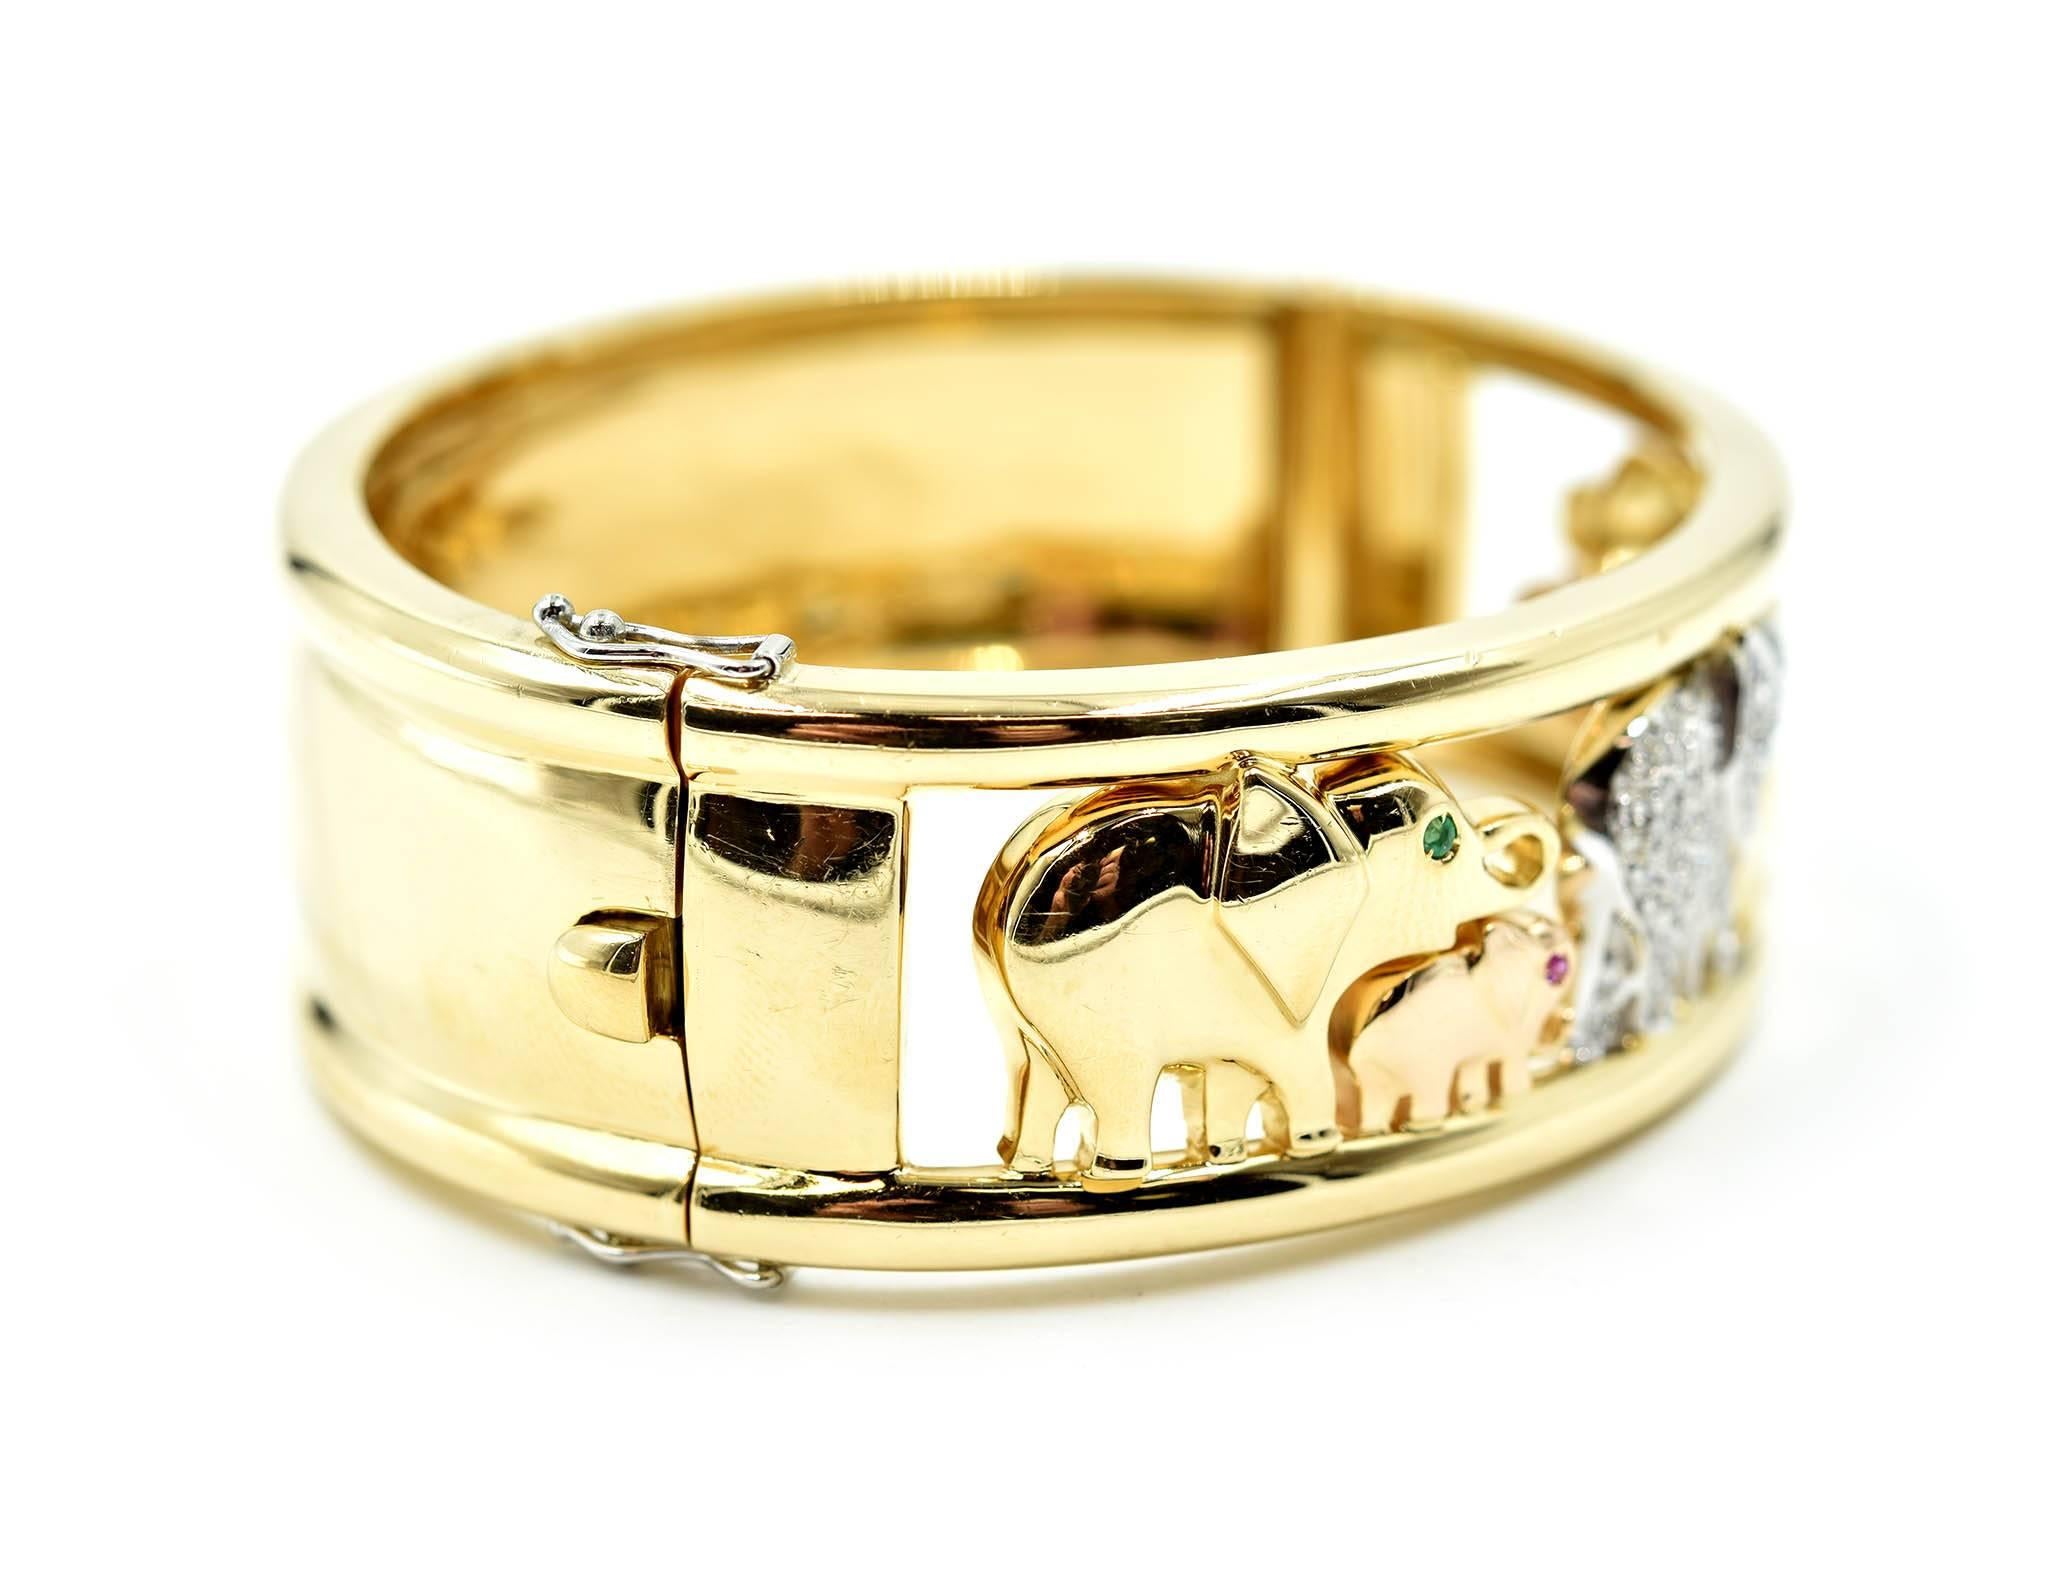 This marvelous bangle bracelet is designed with elephants set with gemstones! The gemstones are diamonds, rubies and emeralds. The bangle is fashioned in 18k yellow gold. The diamonds weigh 0.71 carats. Each diamond is graded G in color and VS in